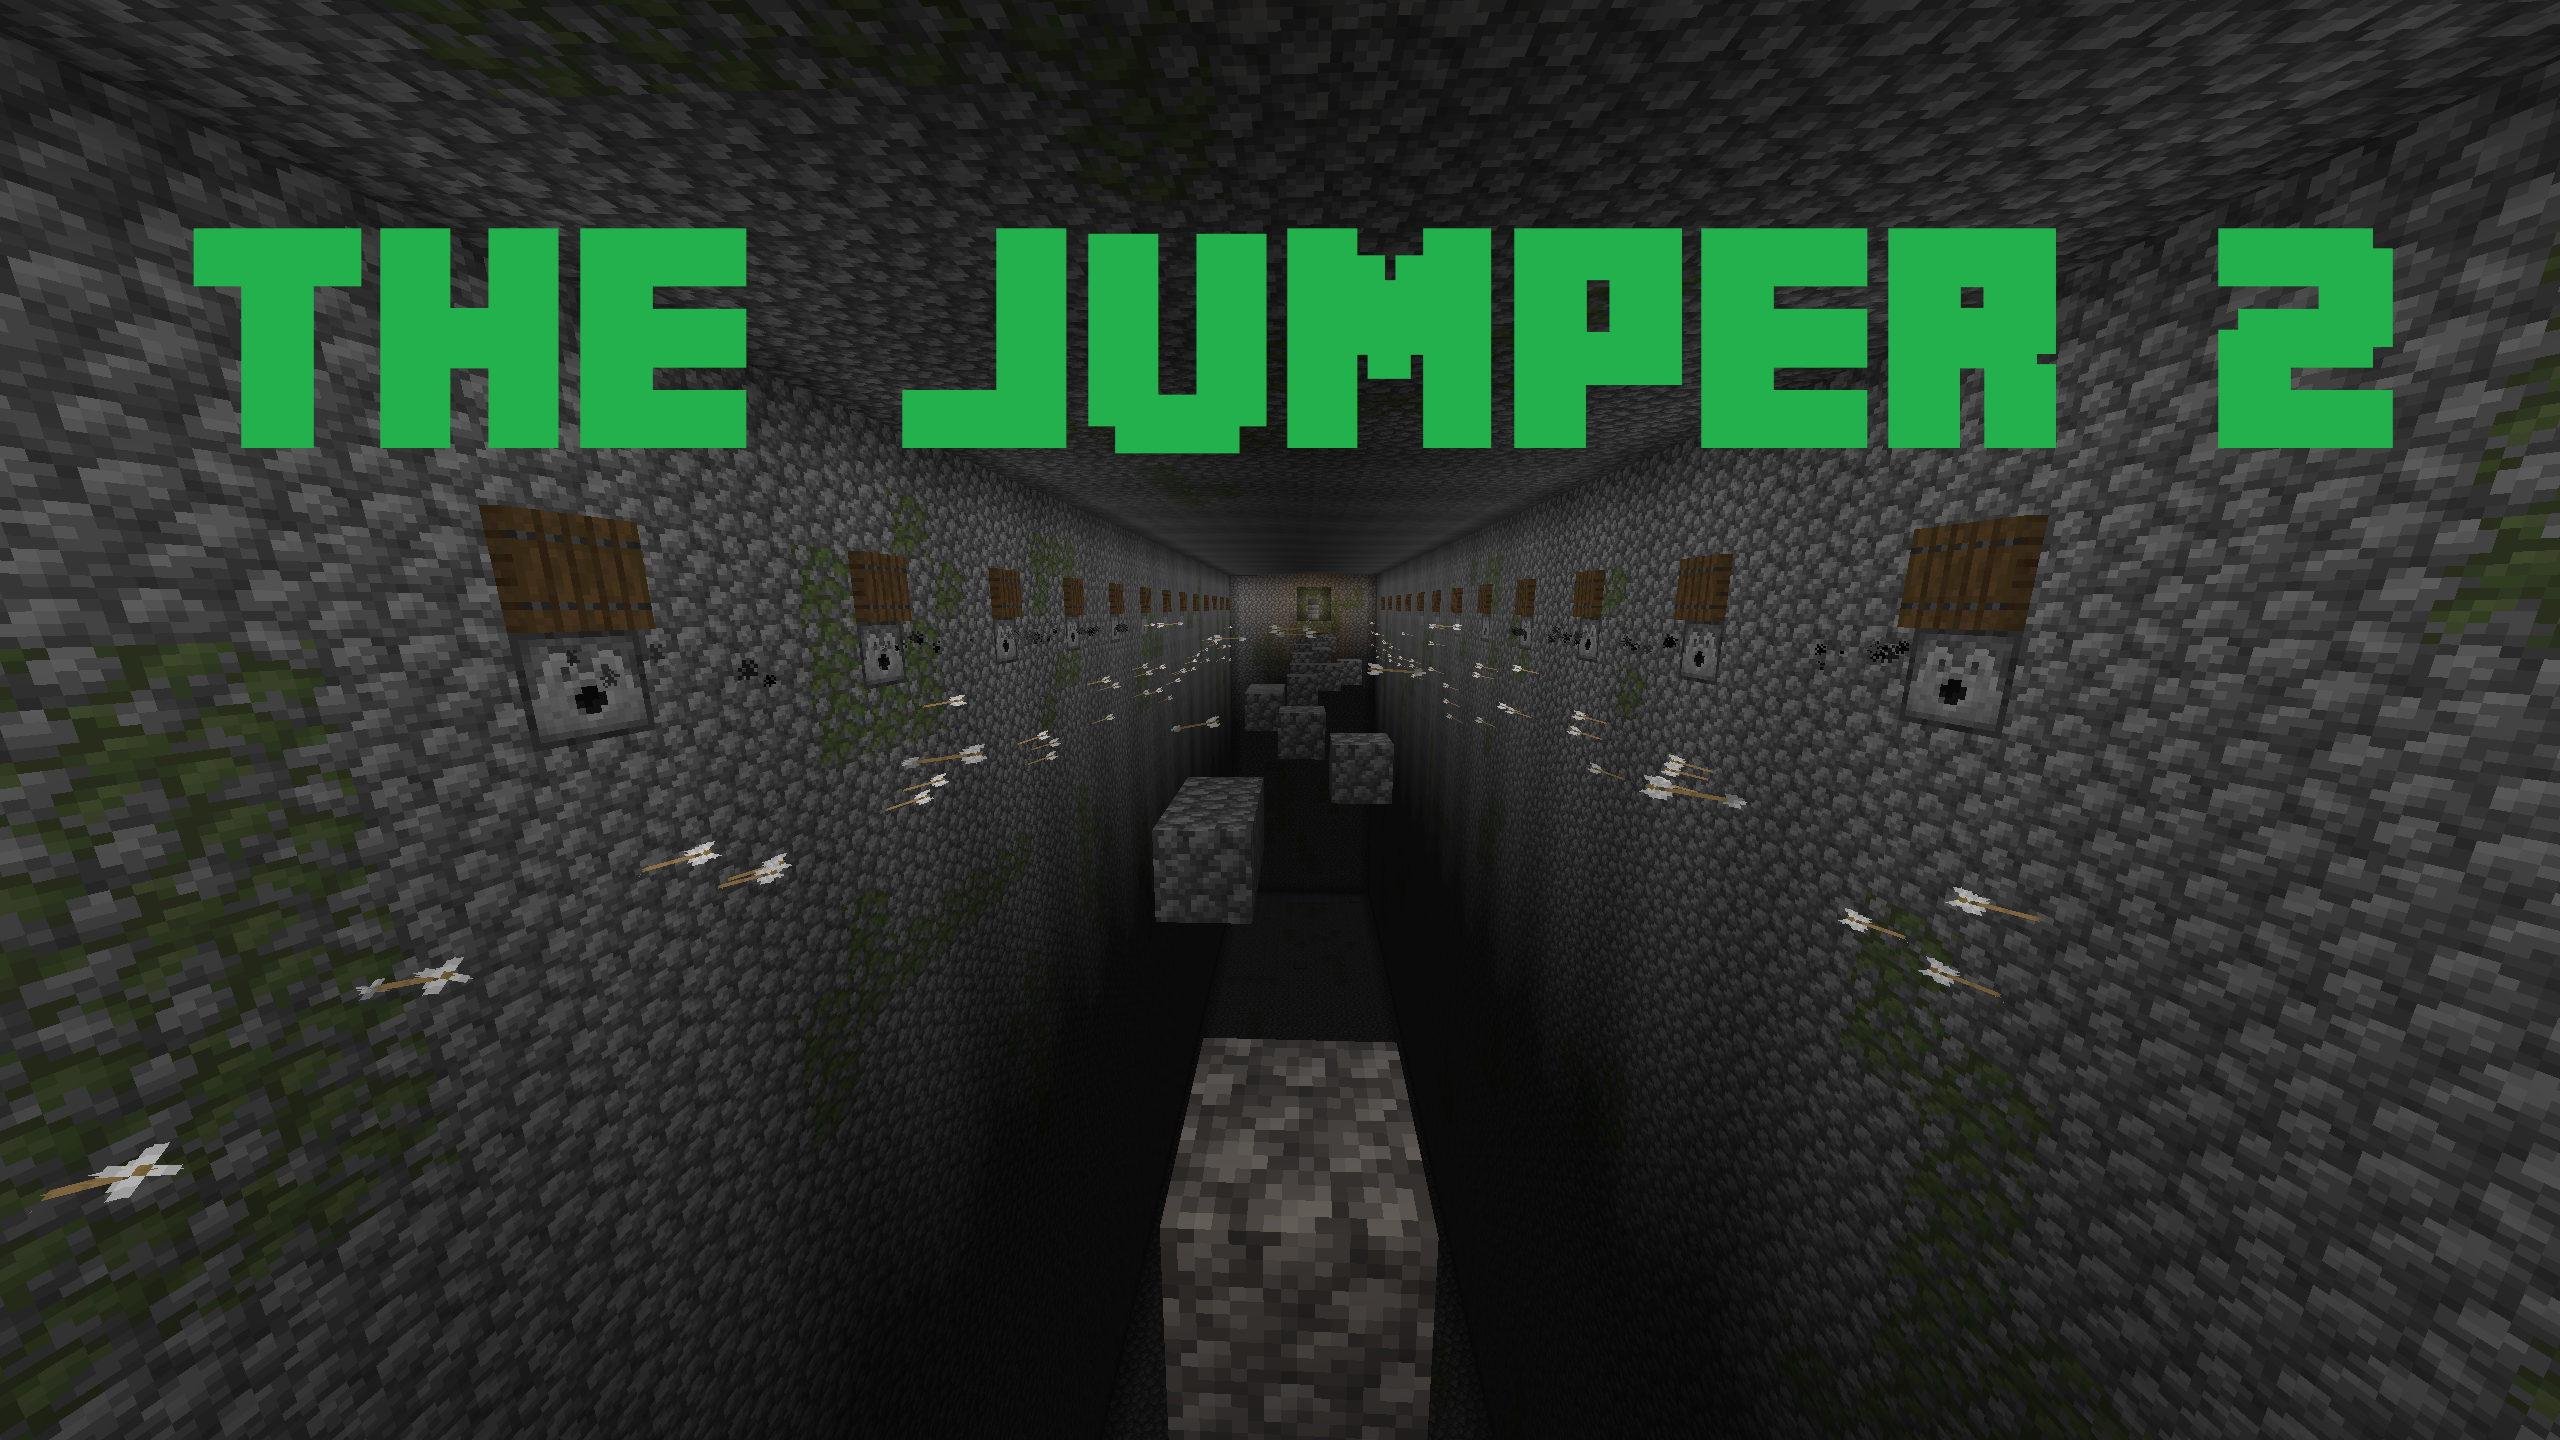 Download The Jumper 2 for Minecraft 1.14.4